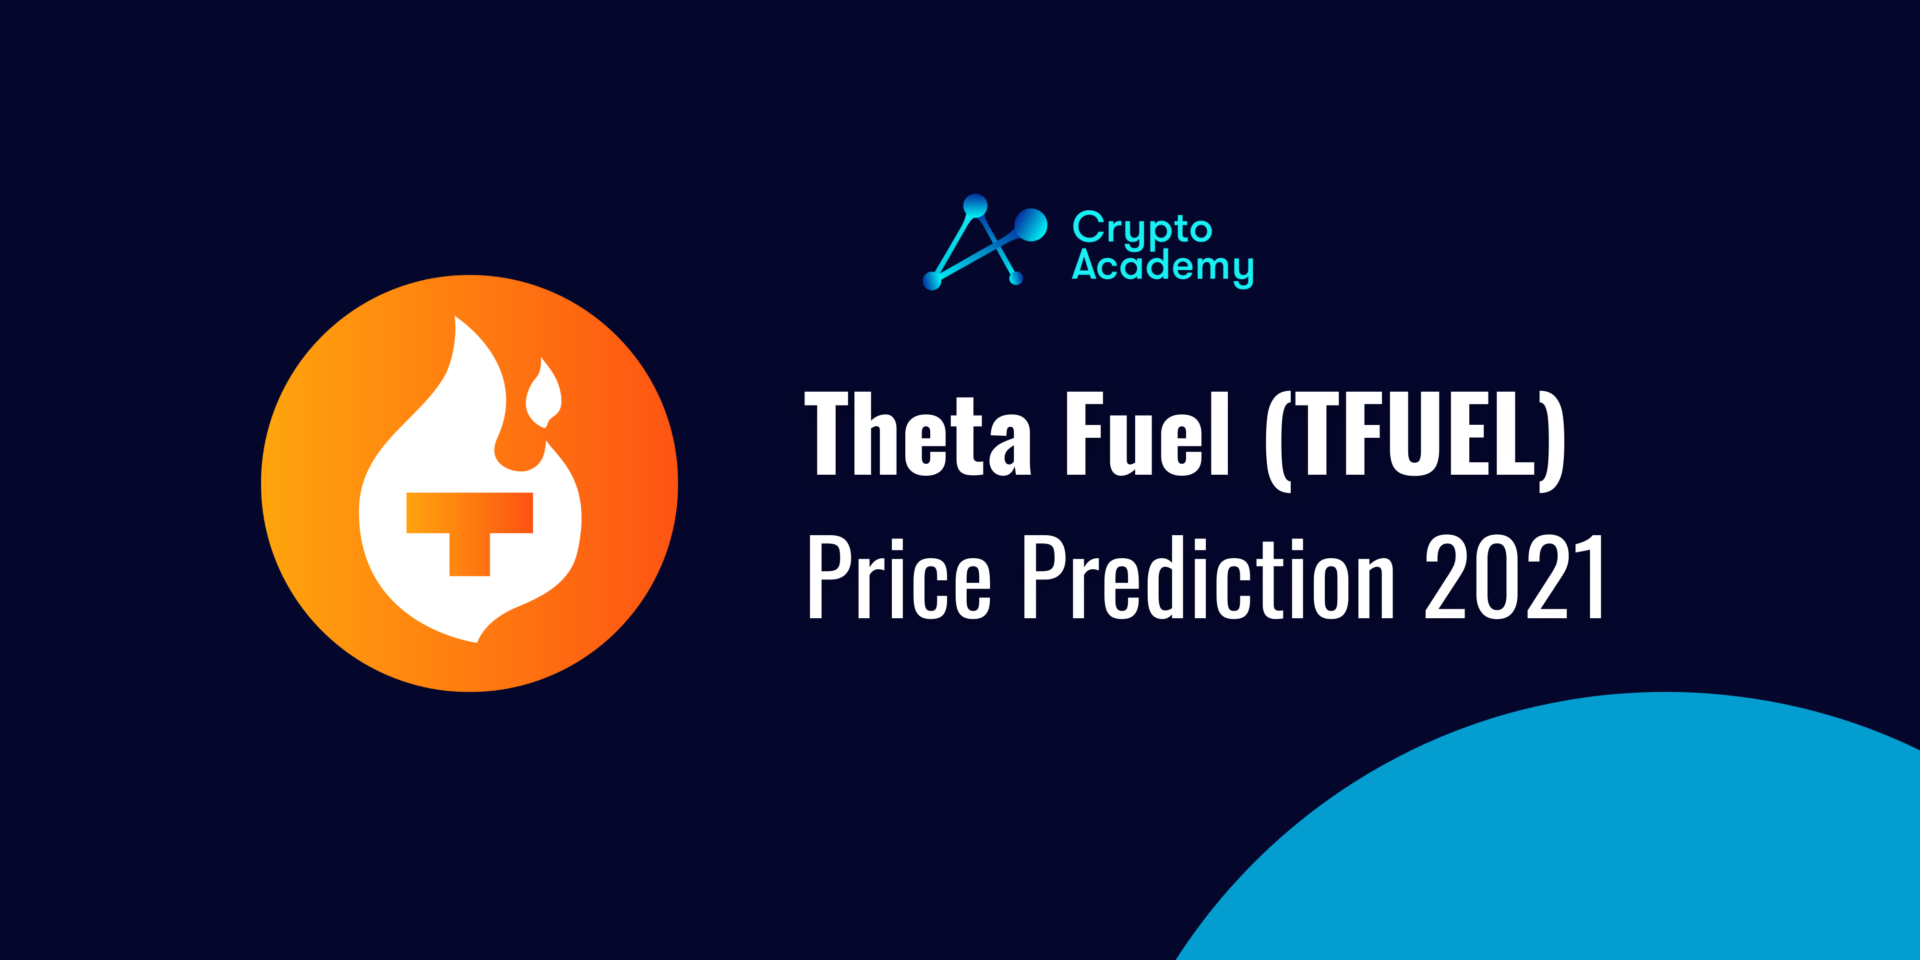 Theta Fuel (TFUEL) Price Prediction 2021 and Beyond - Is TFUEL a Good Investment?